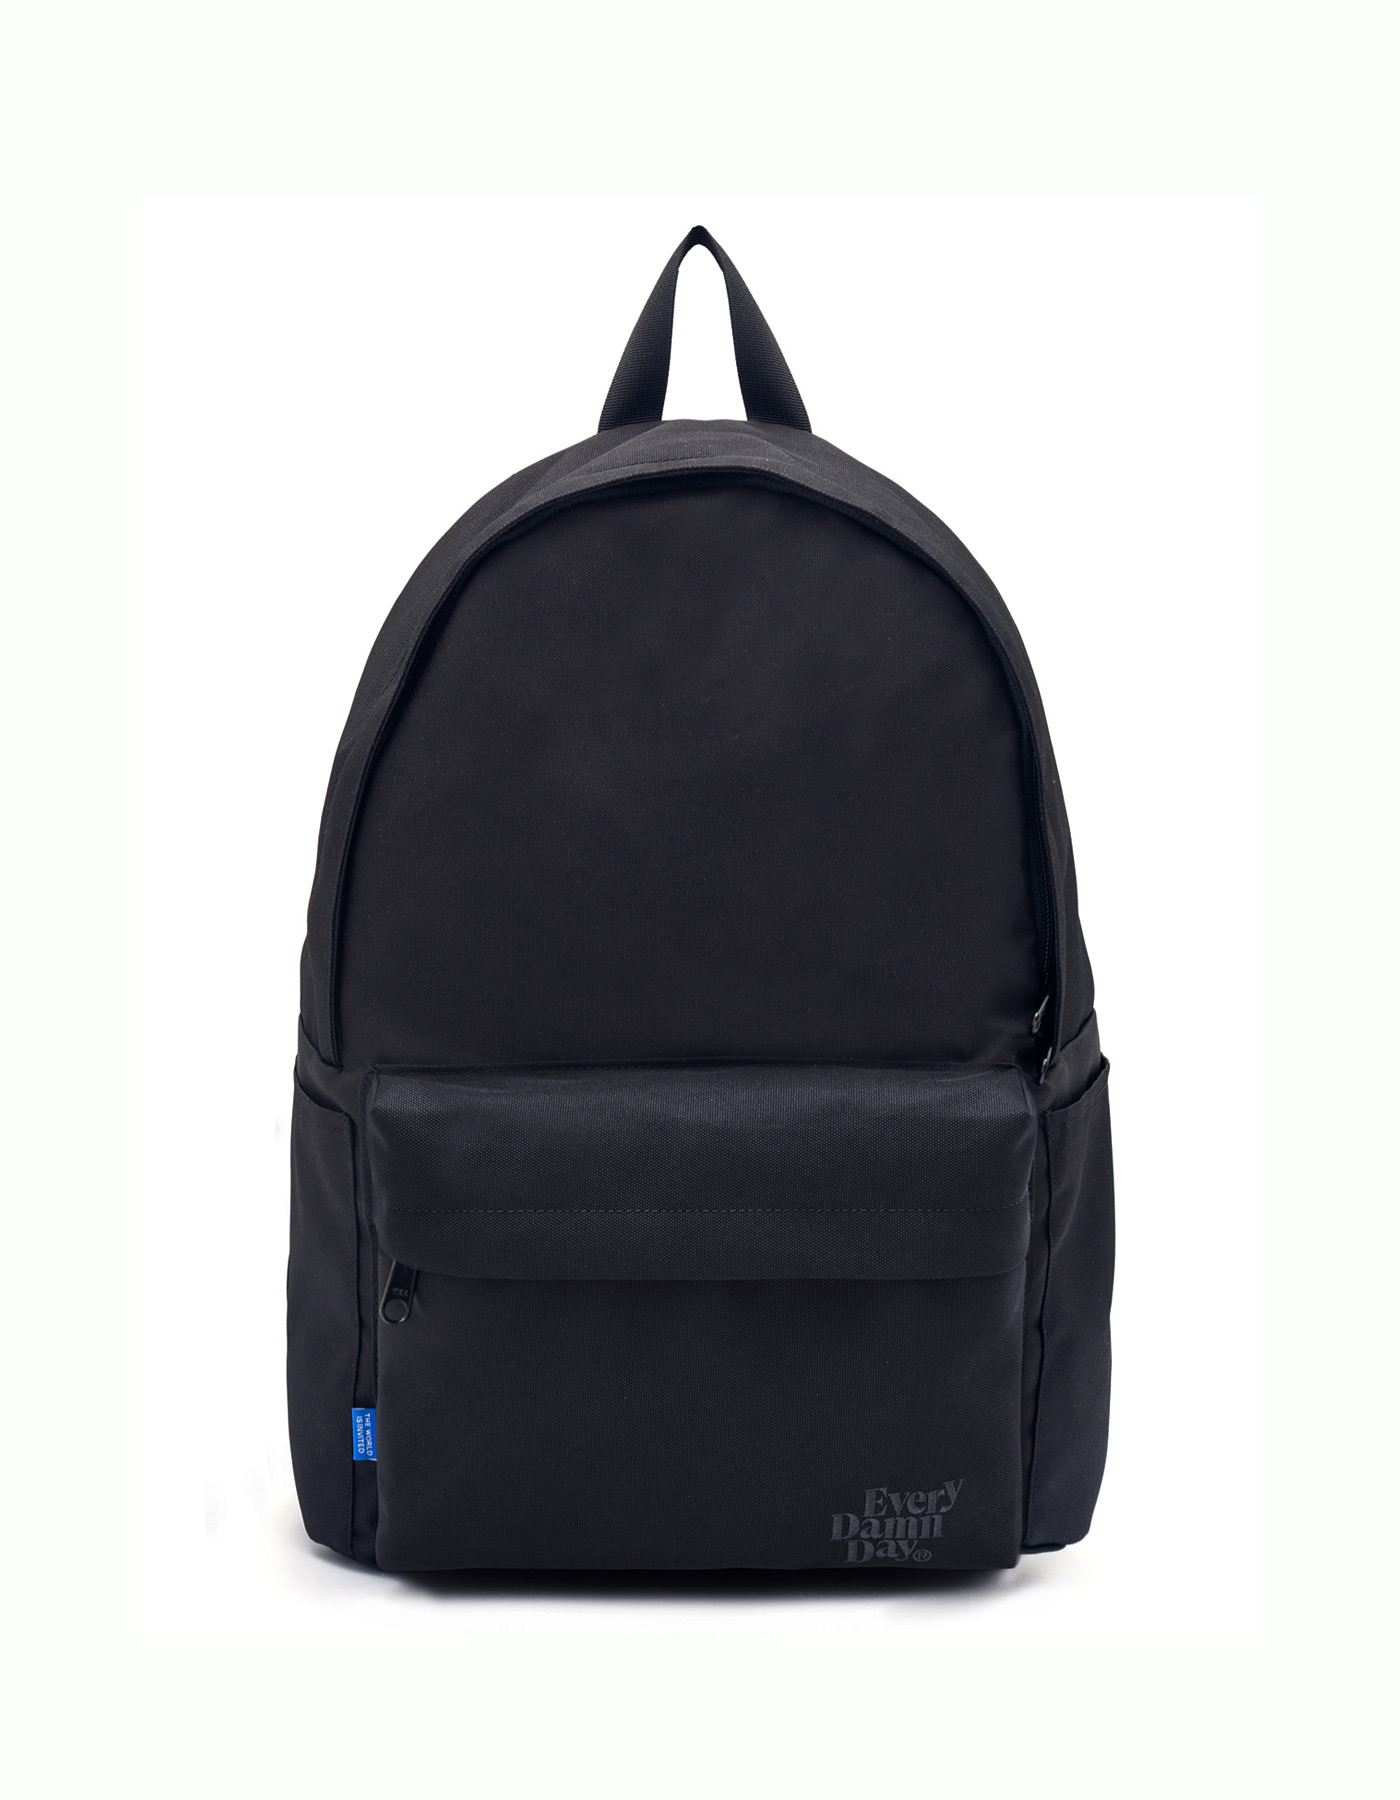 Every Damn Day® Backpack - Black